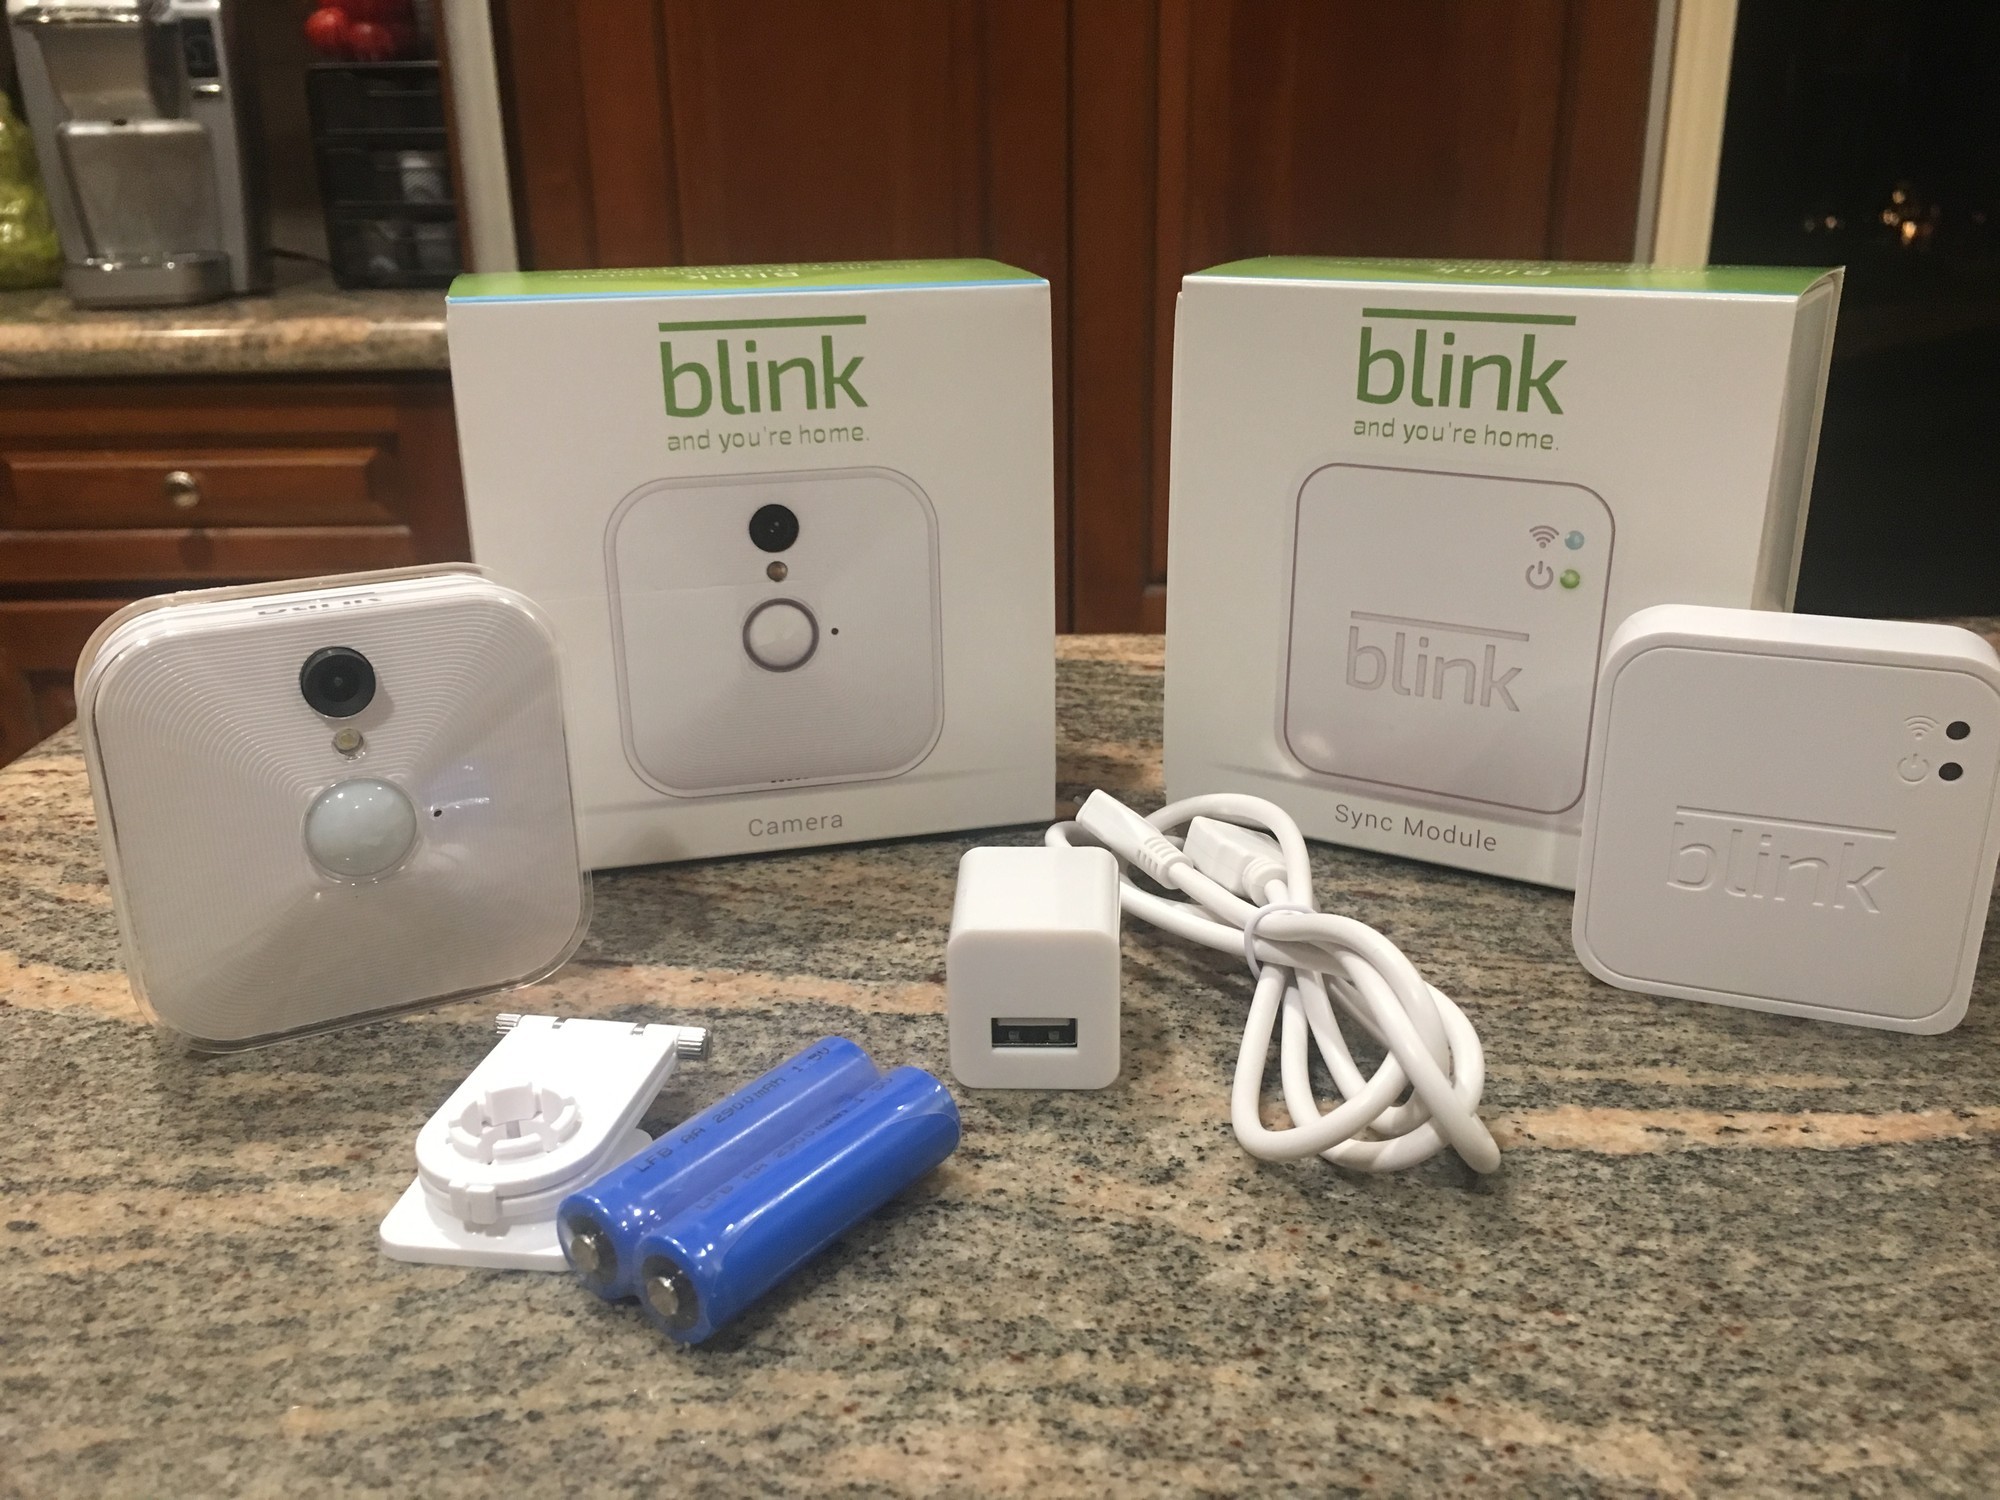 Blink SmartHome - Blink for Home by Immedia